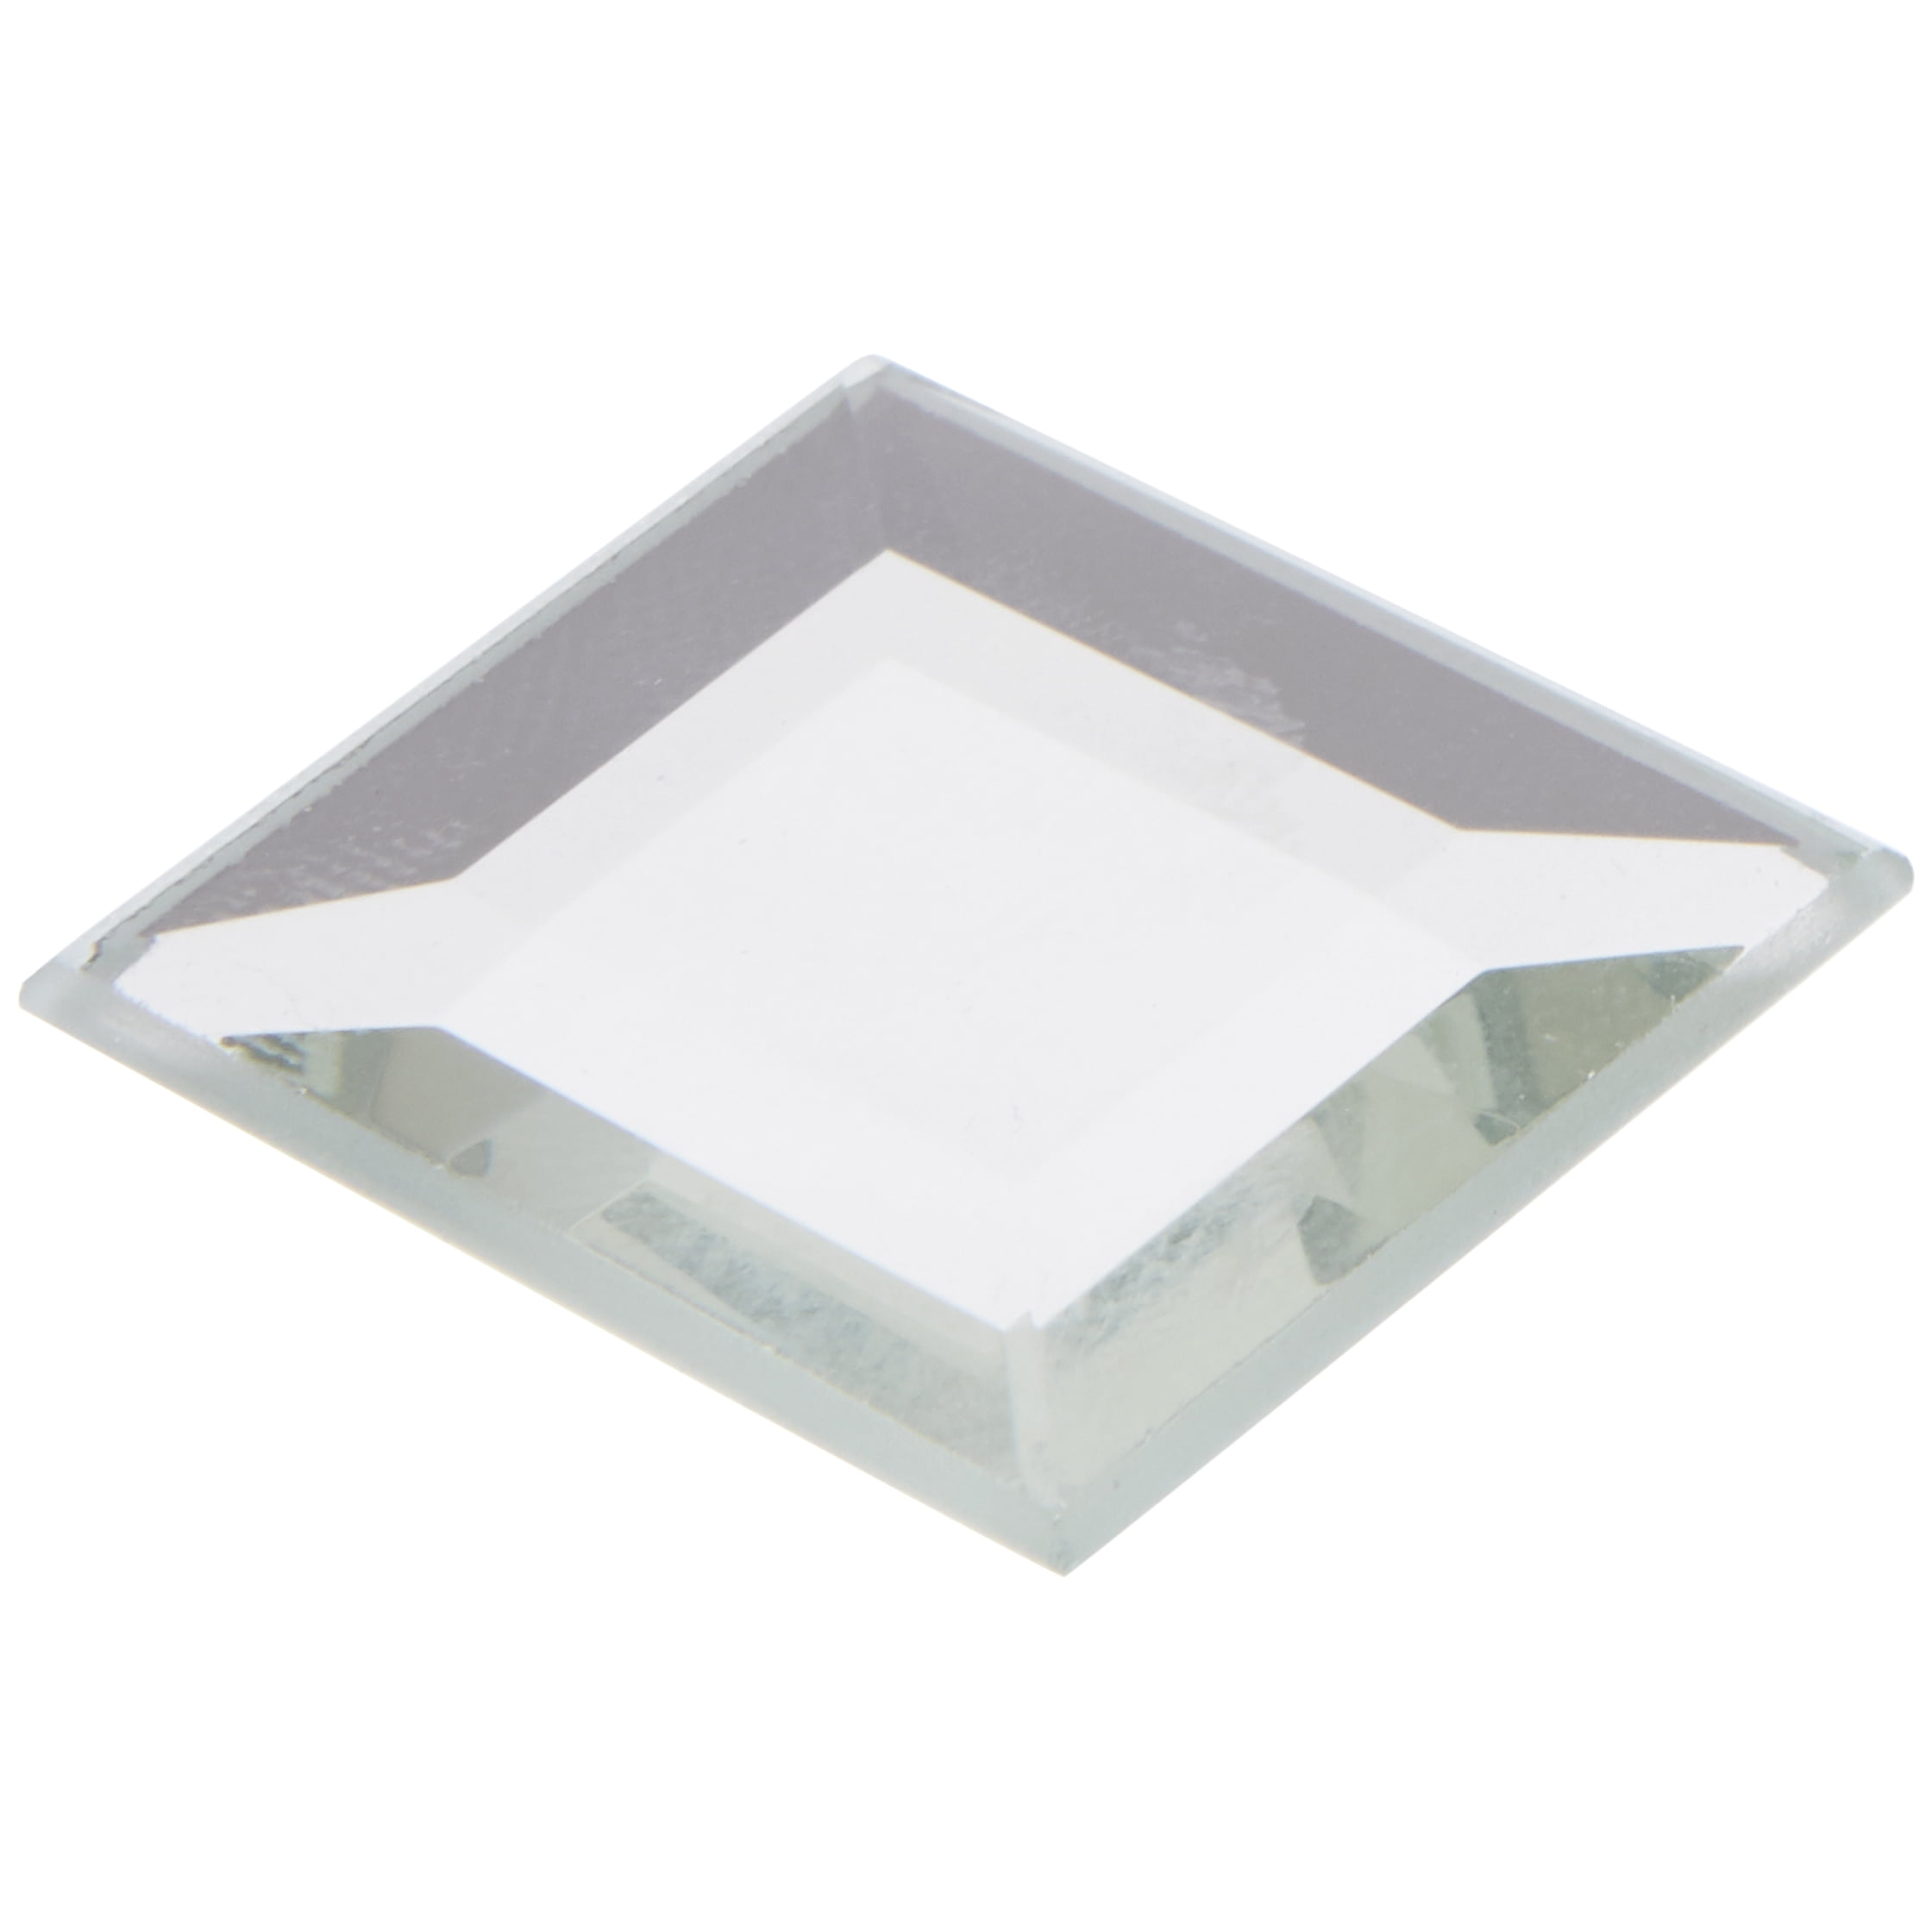 Plymor Square 5mm Beveled Glass Mirror 8 inch x 8 inch 